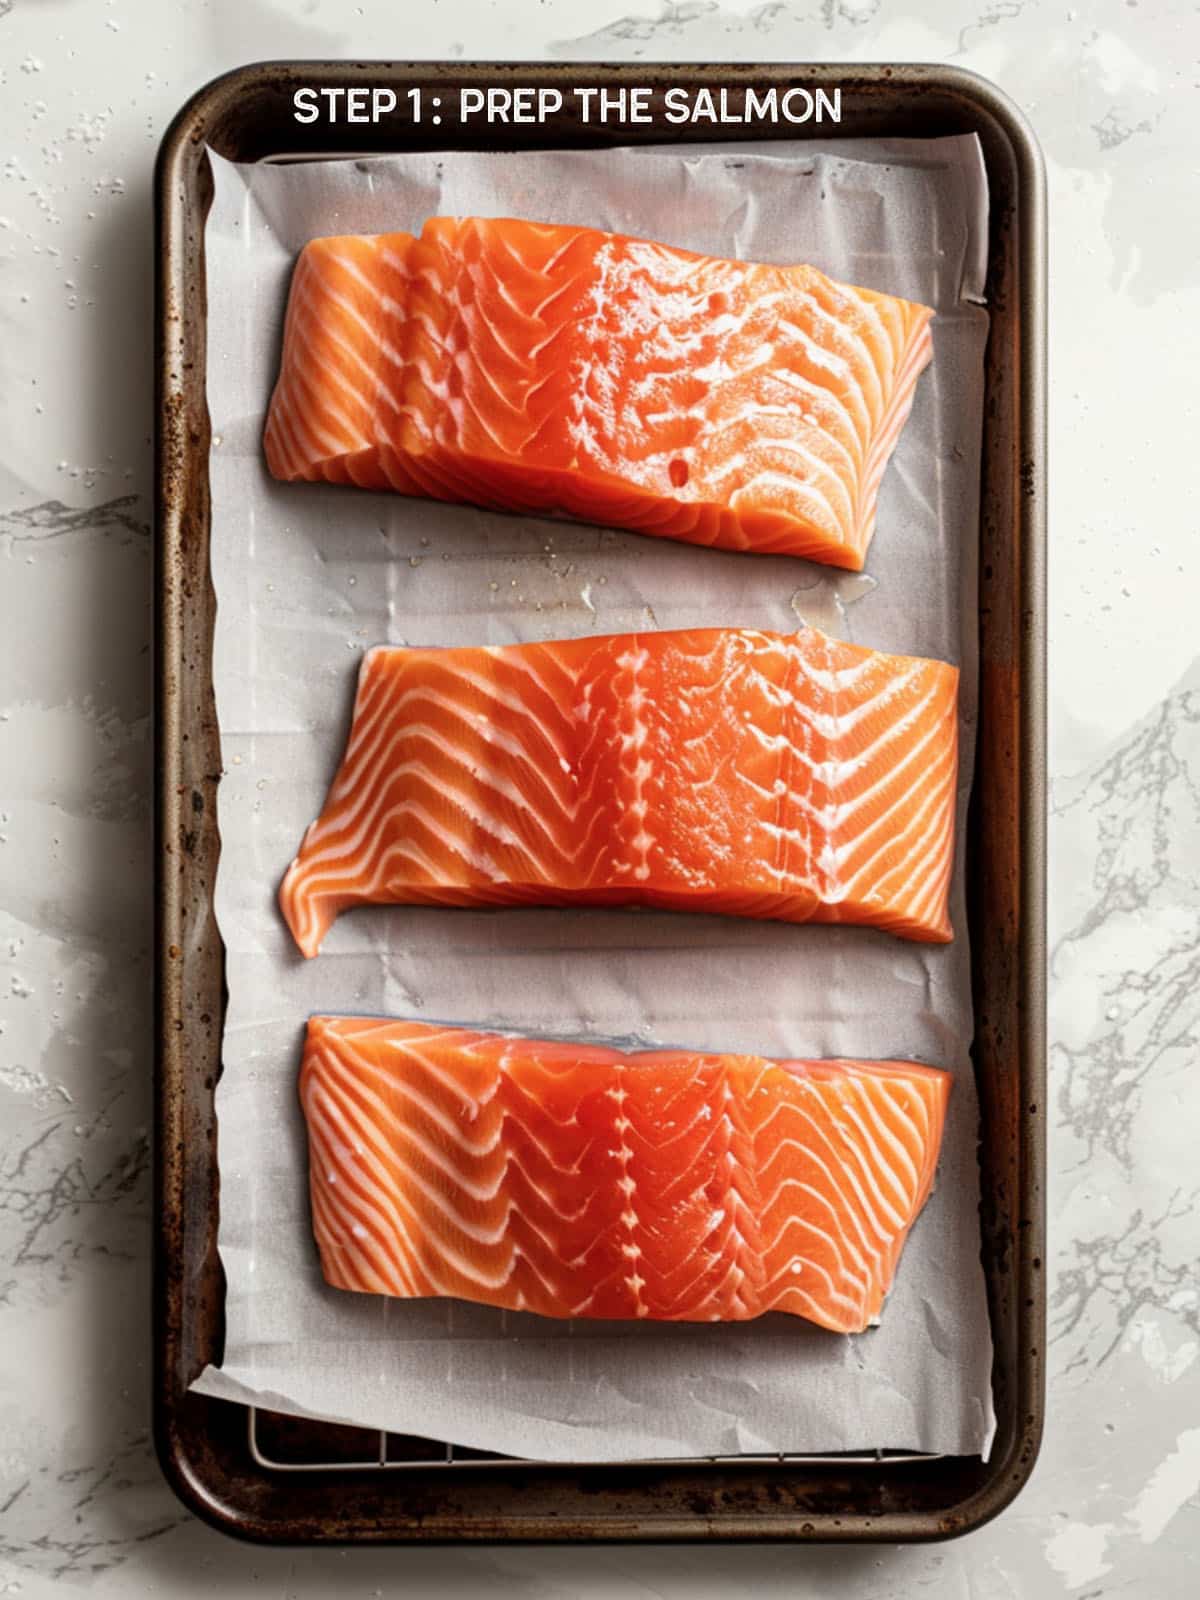 Close-up of salmon fillet being prepped for smoking.